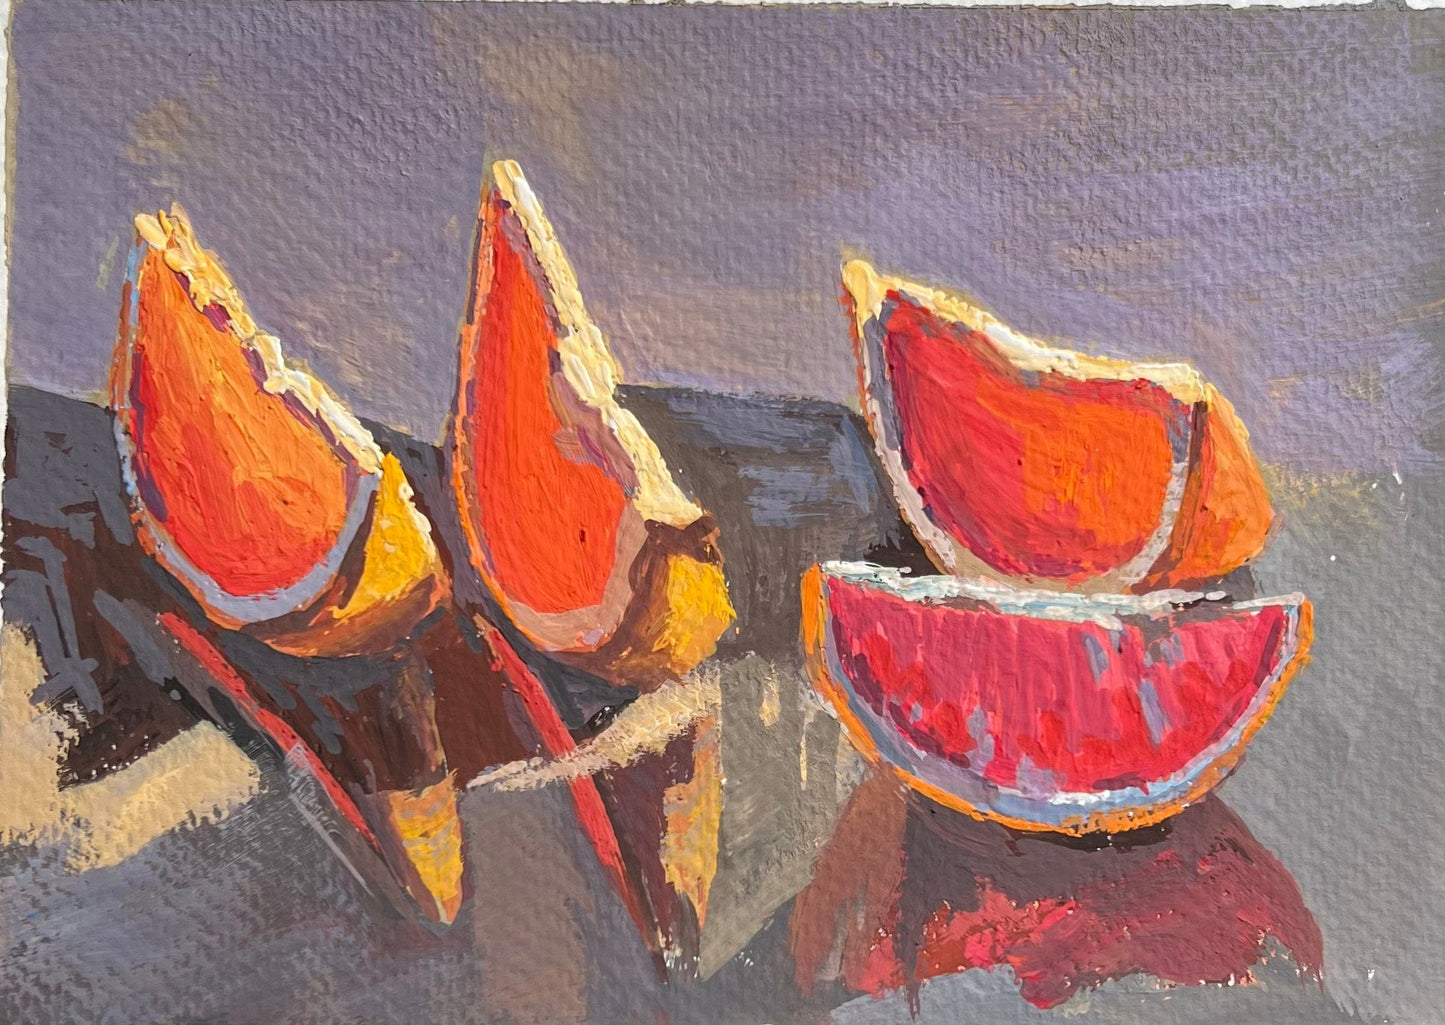 Gouache Painting - Grapefruit Slices in my kitchen